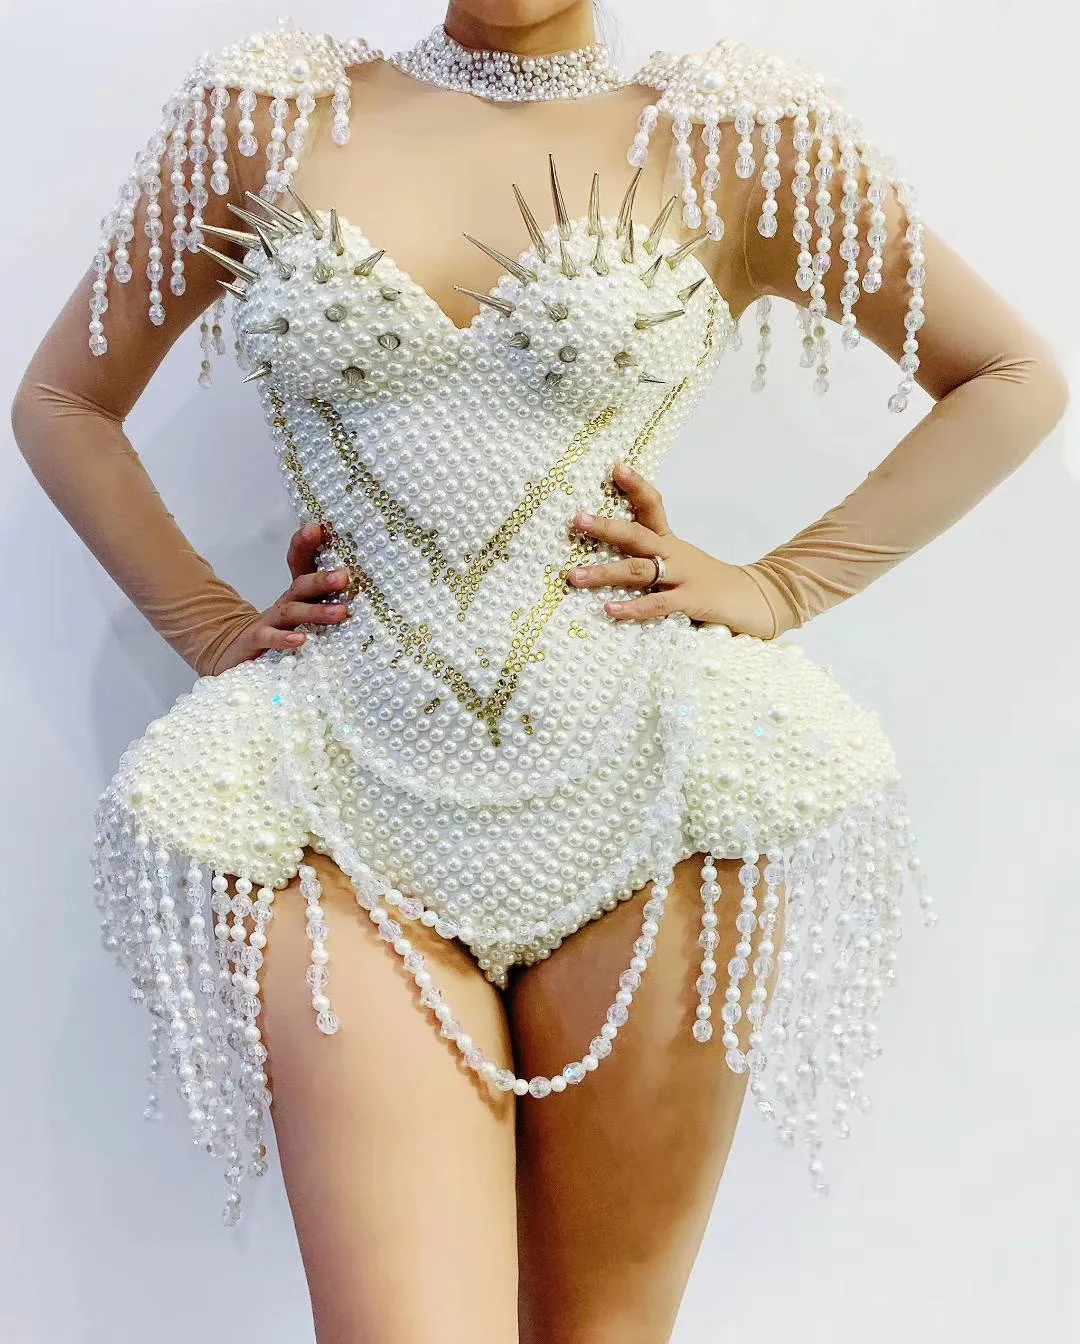 

Perspective Halter White Pearls Beading Rivet Backless Sexy Bodysuits For Women Stage Singer Perform Cloth Party Nightclub Wear